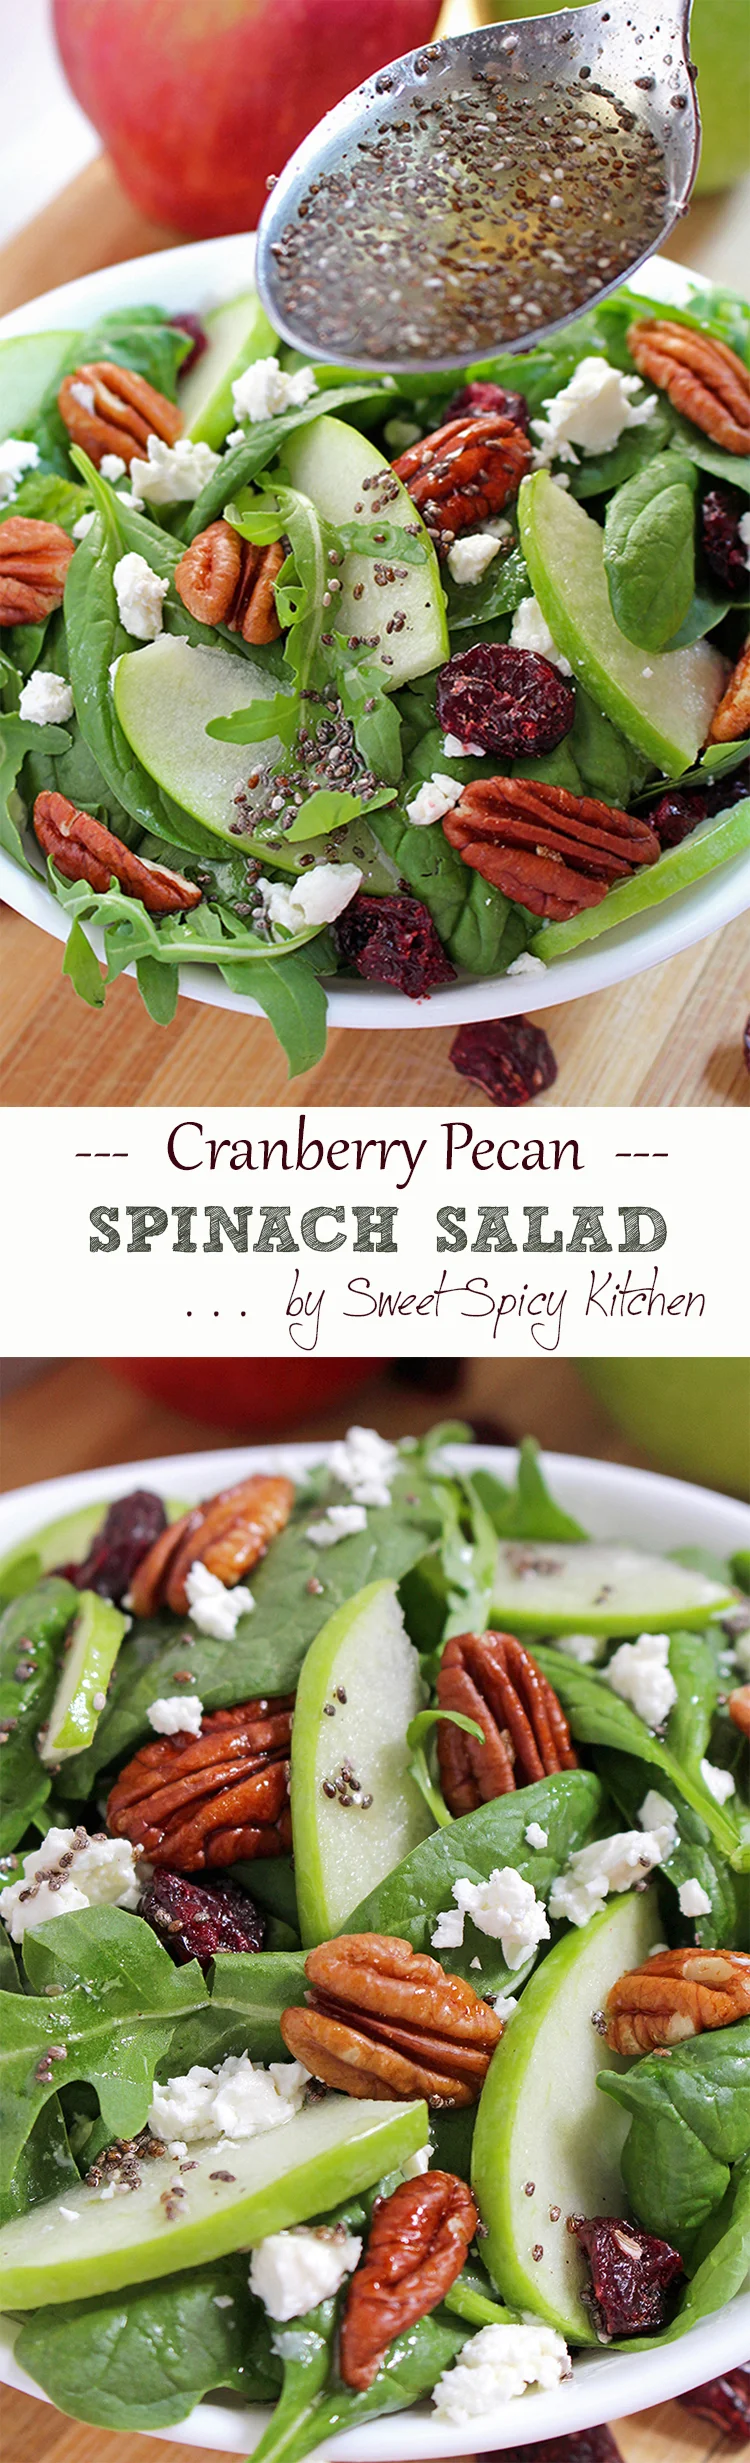 Untitled-19 Cranberry Pecan Spinach Salad 